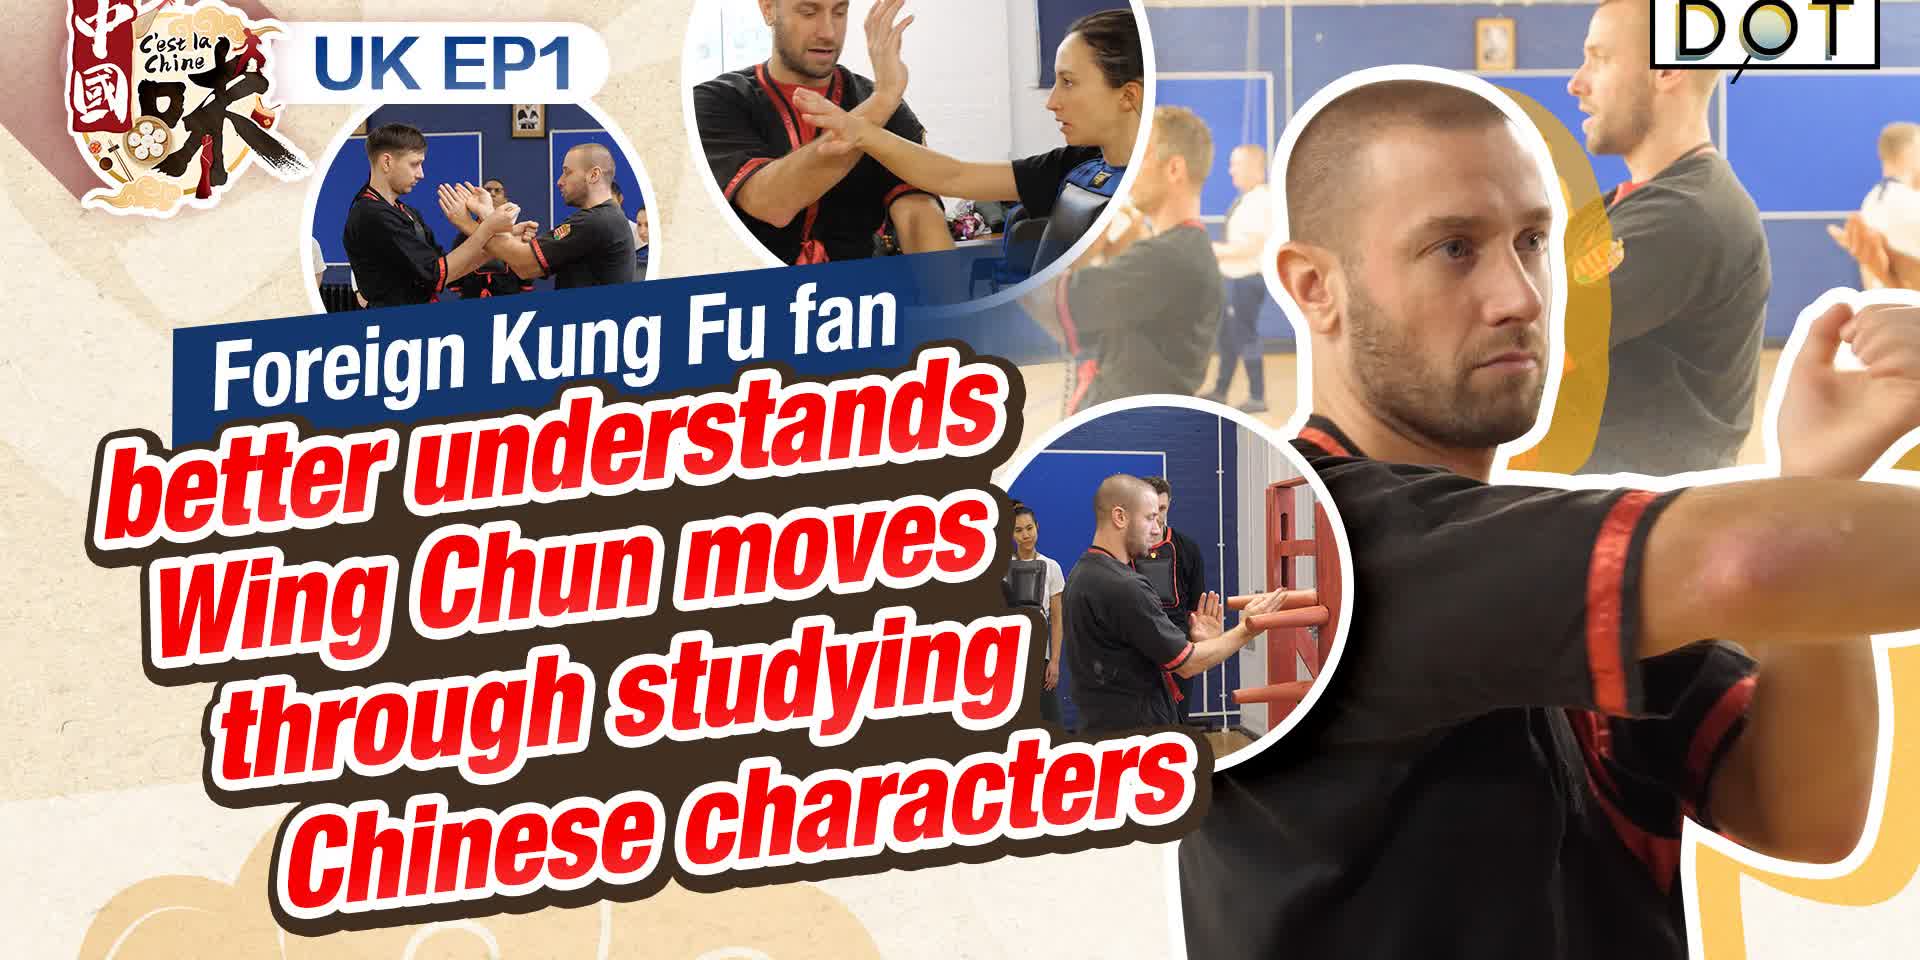 C'est la Chine · UK | Foreign Kung Fu fan better understands Wing Chun moves through studying Chinese characters